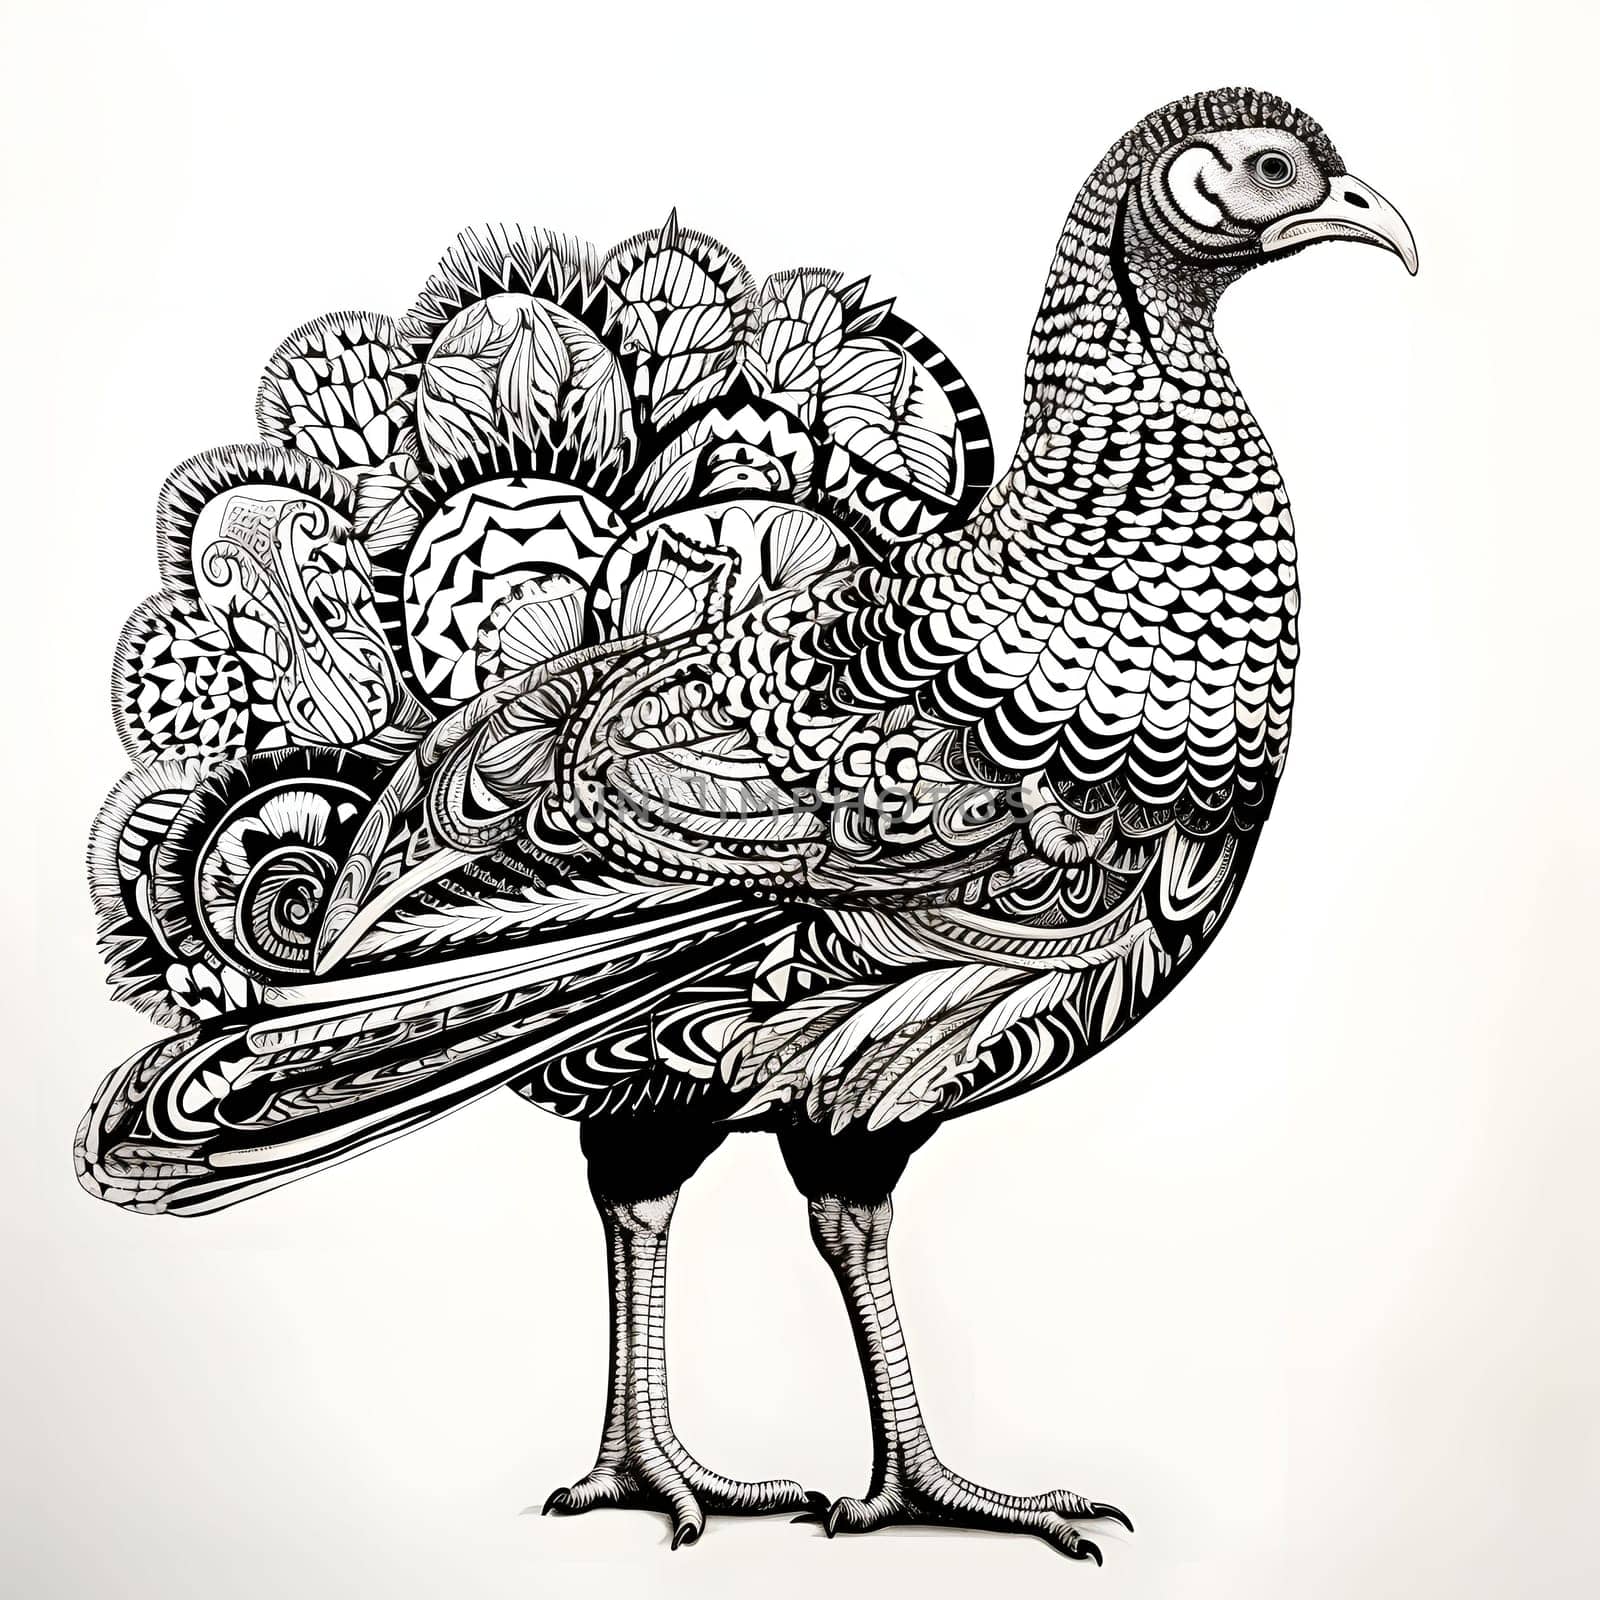 Black and white patterned and turkey. Turkey as the main dish of thanksgiving for the harvest. by ThemesS